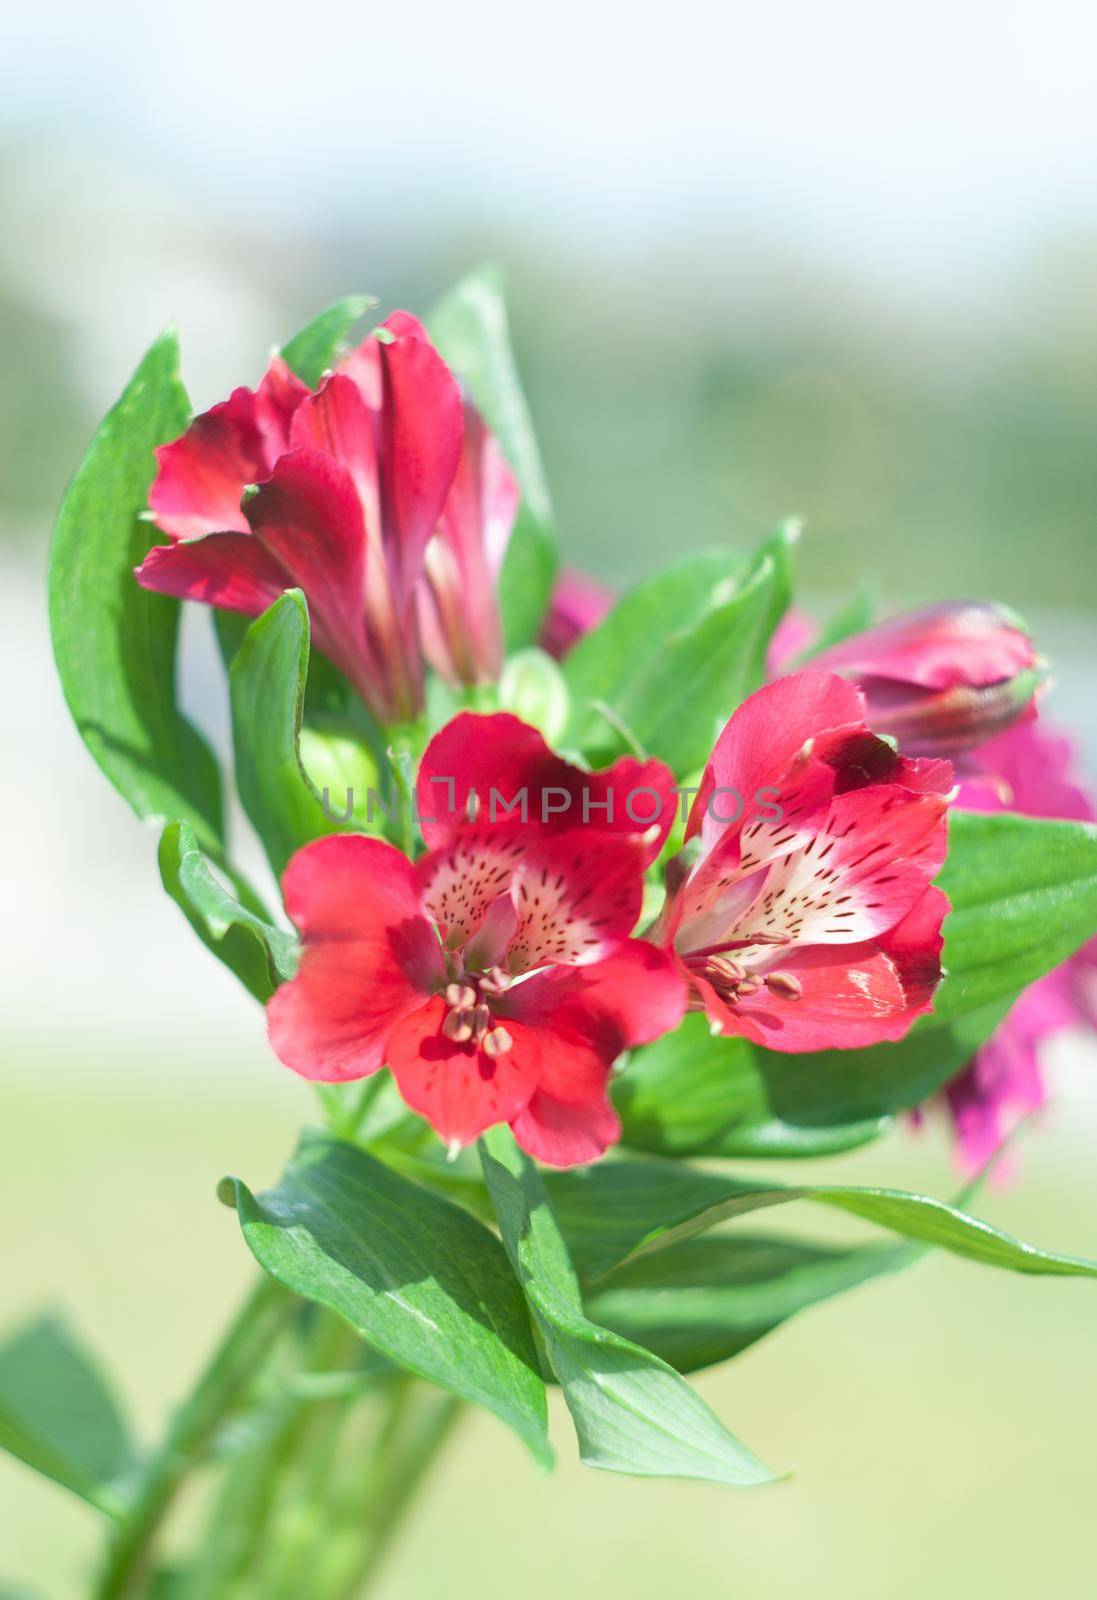 bouquet of red alstroemeria, close-up, floral background, spring bouquet, gift for mother's day, March 8, international women's day